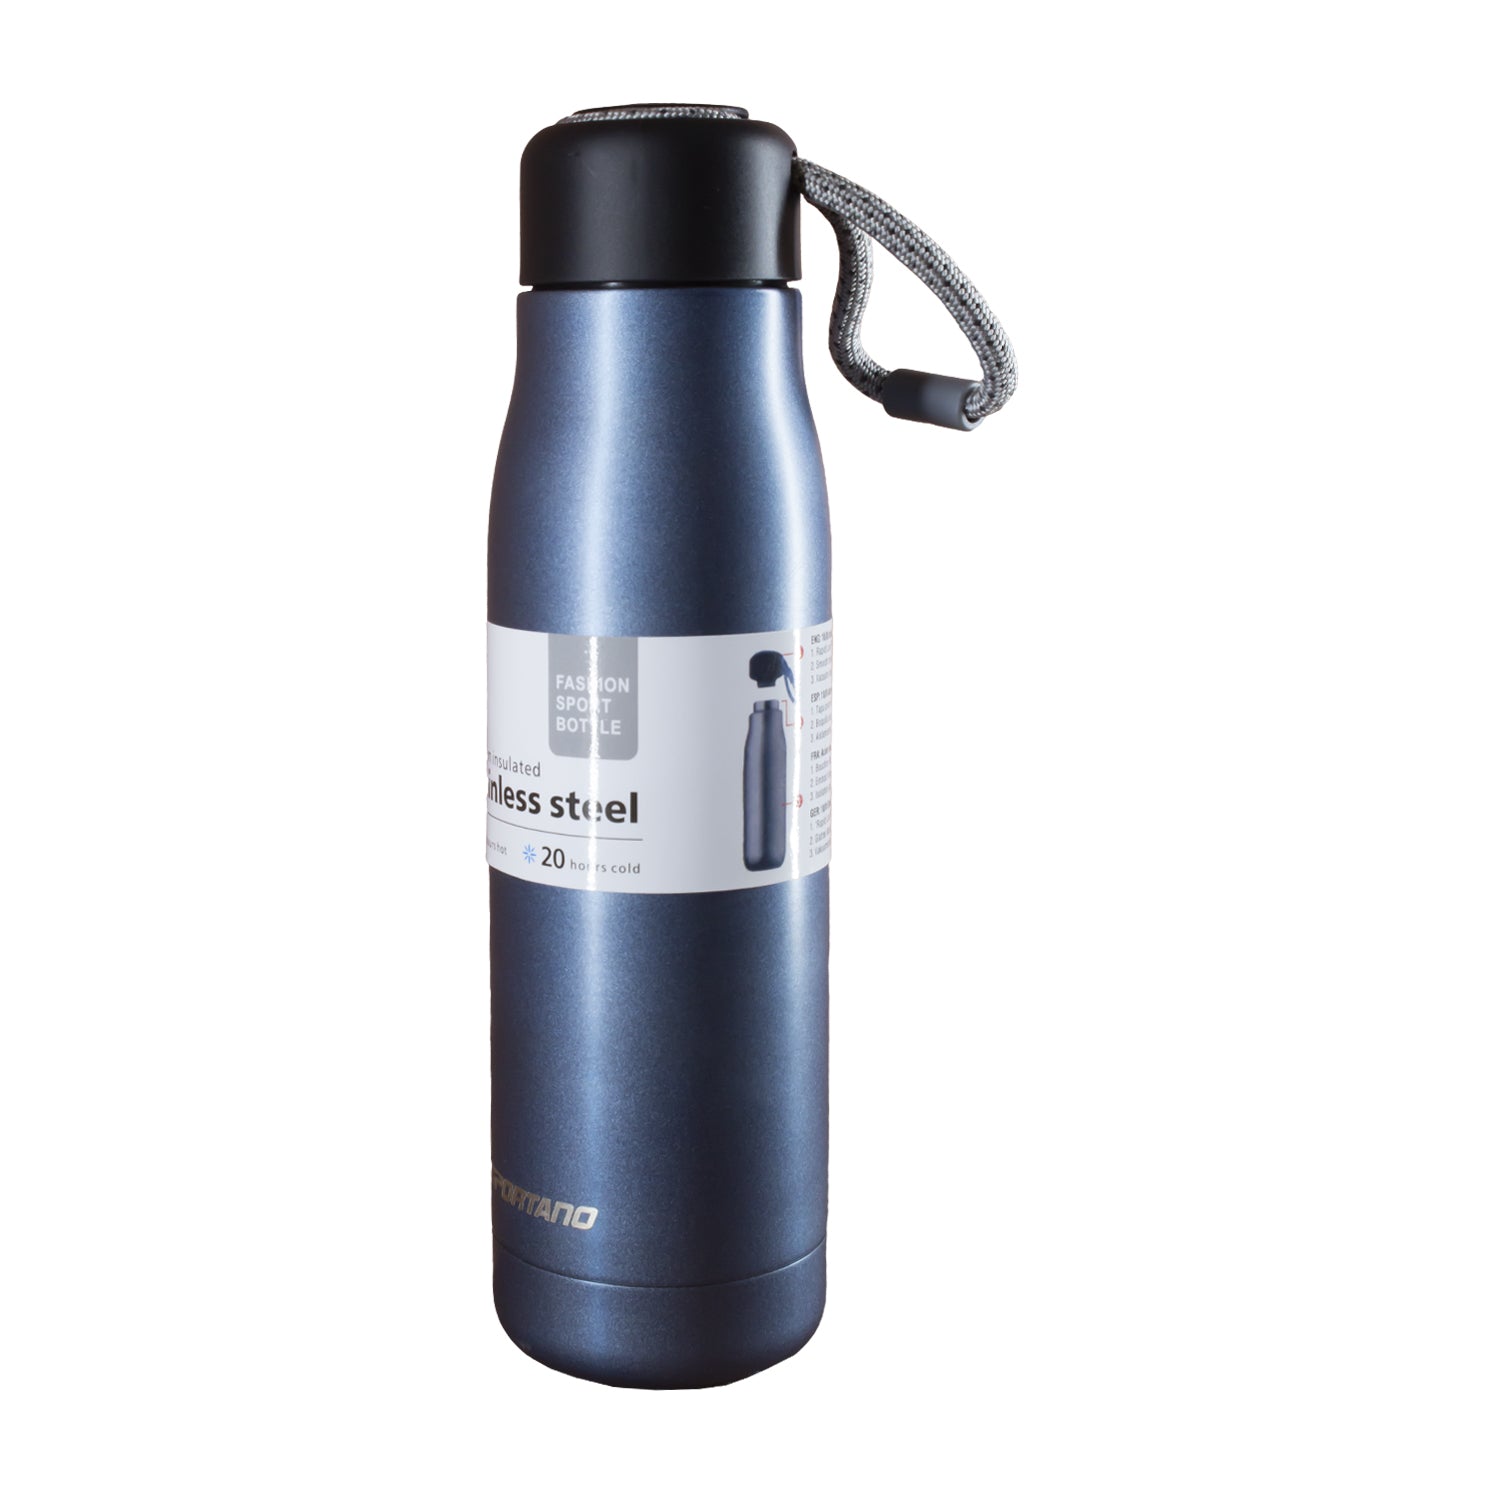  XML Water and Shaker Bottle for Men Women at Gym